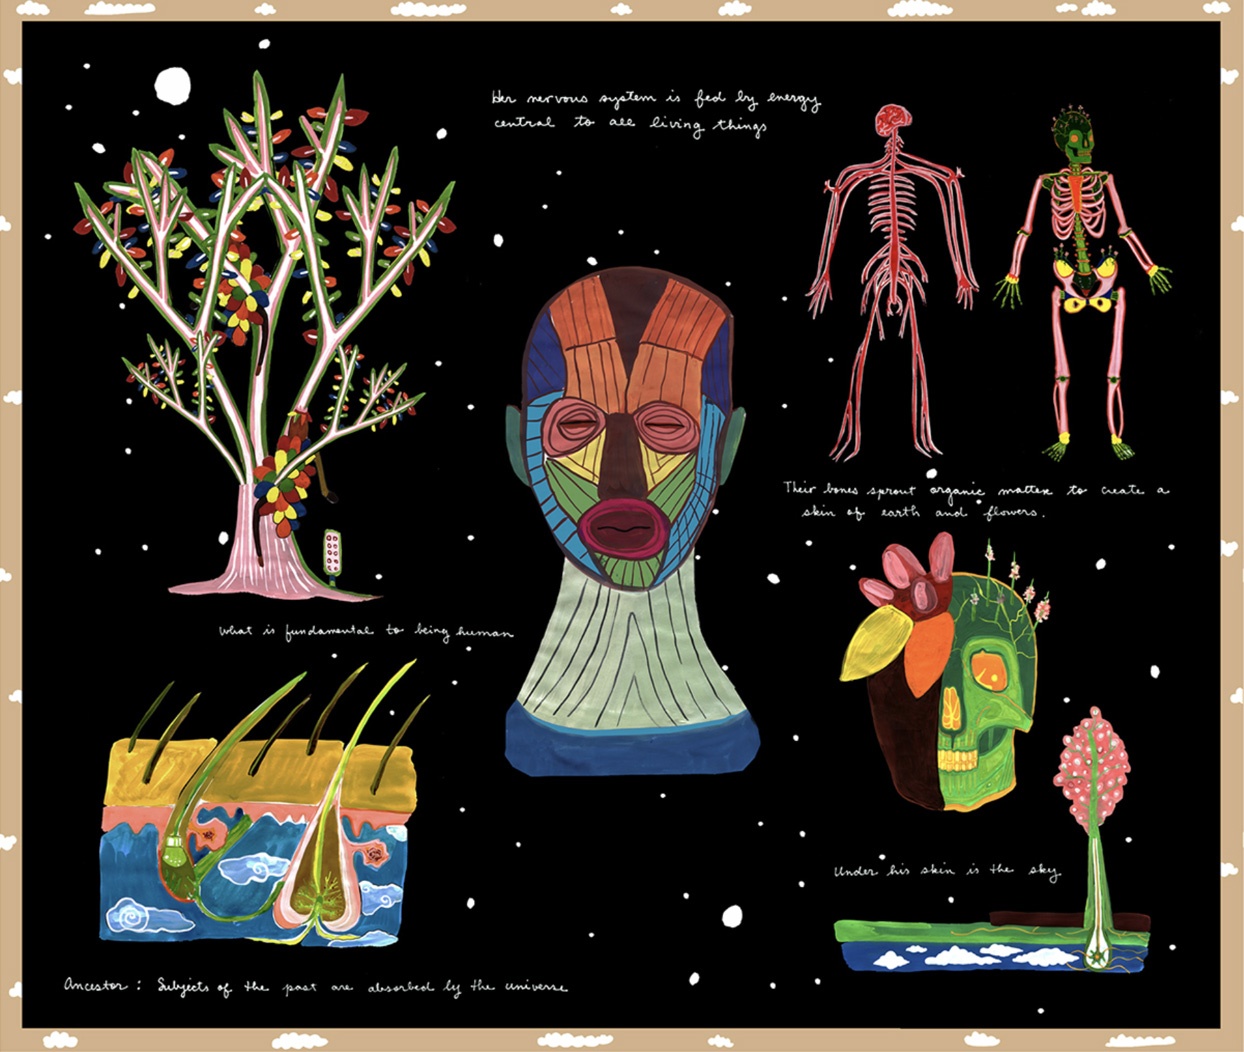 Colorful, anatomical drawings of human bodies combined with plants on a black background.